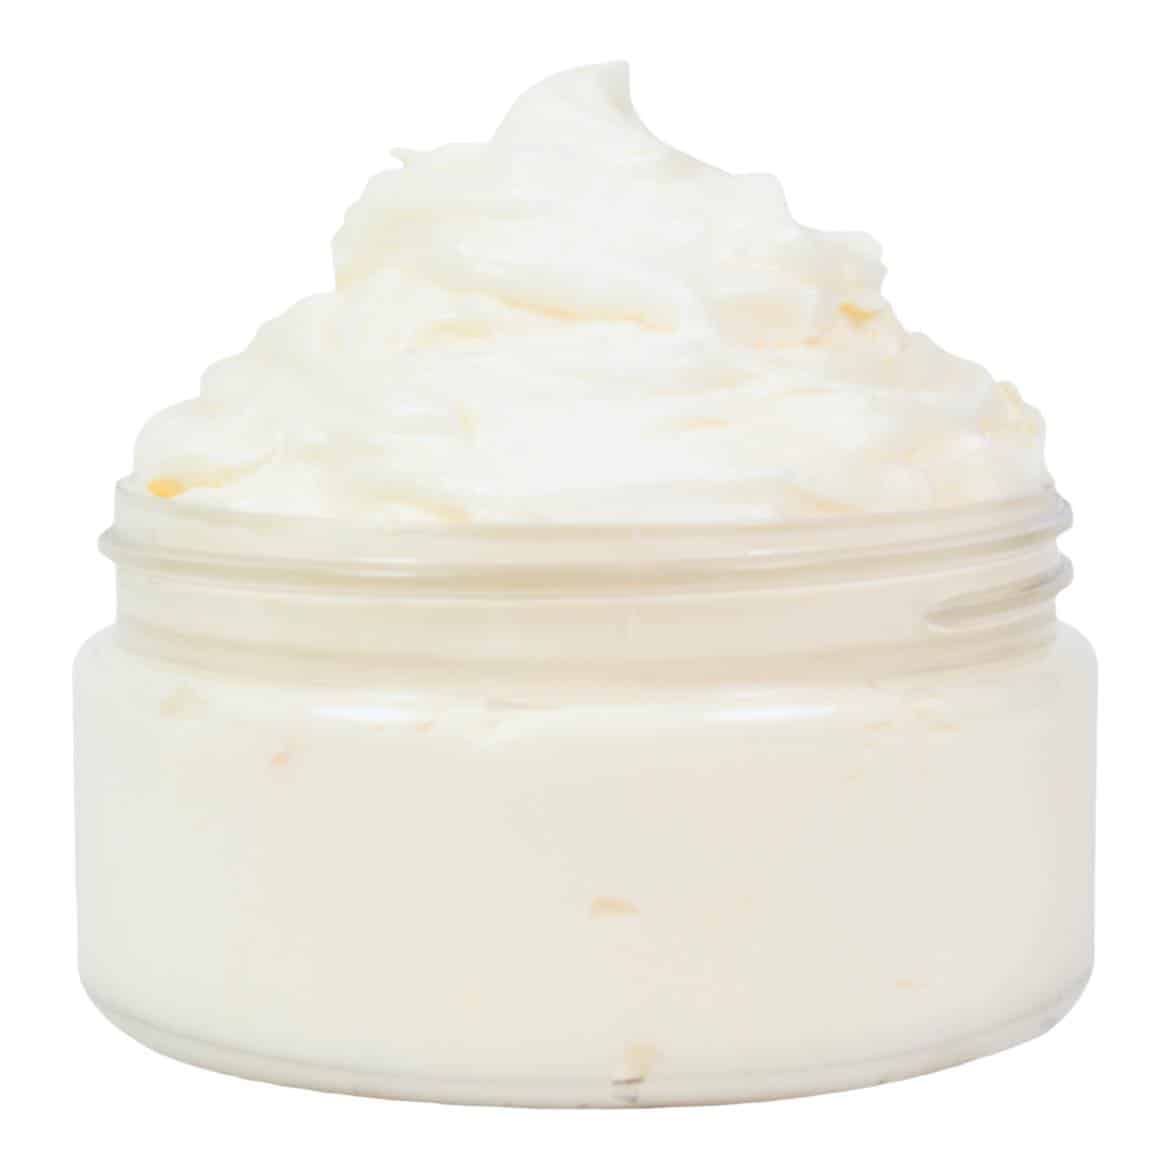 Body Butter Making Assessment Sweets / Halloween Scents